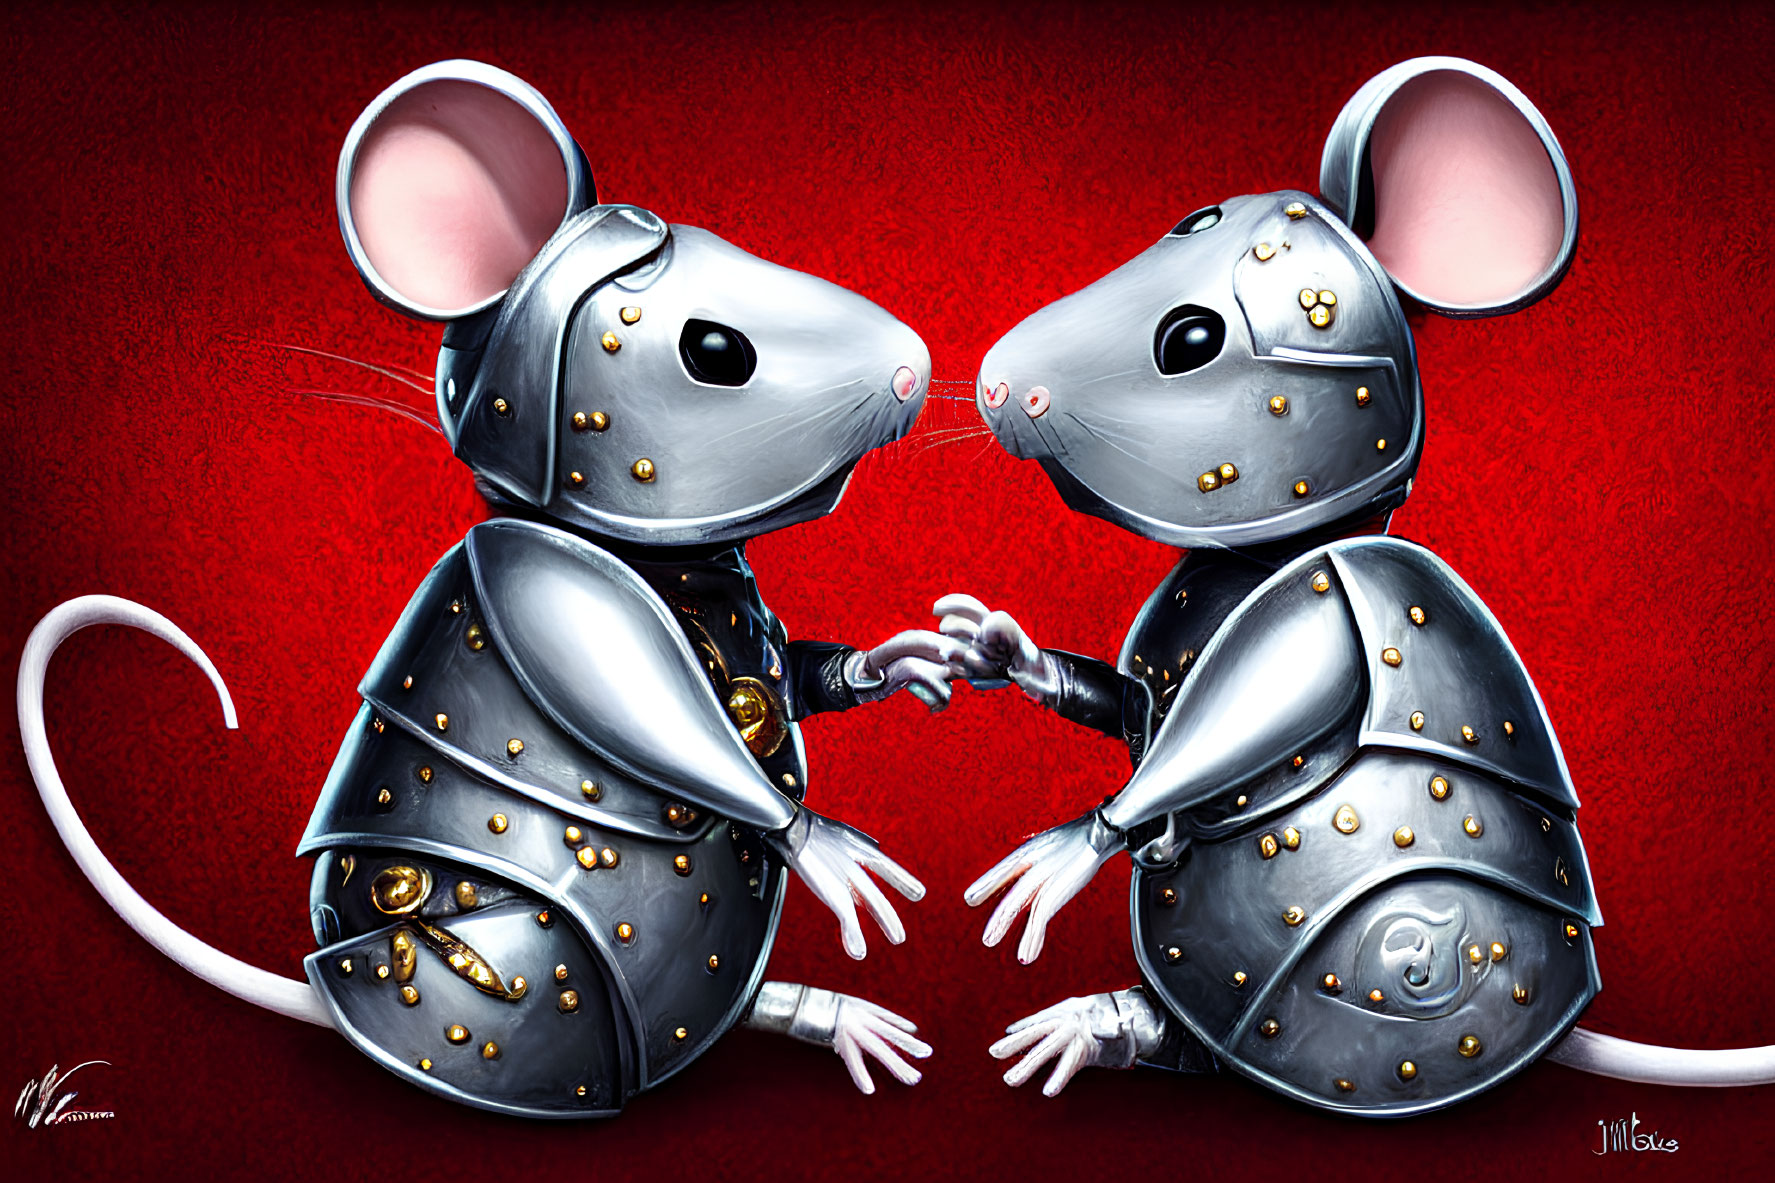 Medieval armor-clad mice touching hands on red background